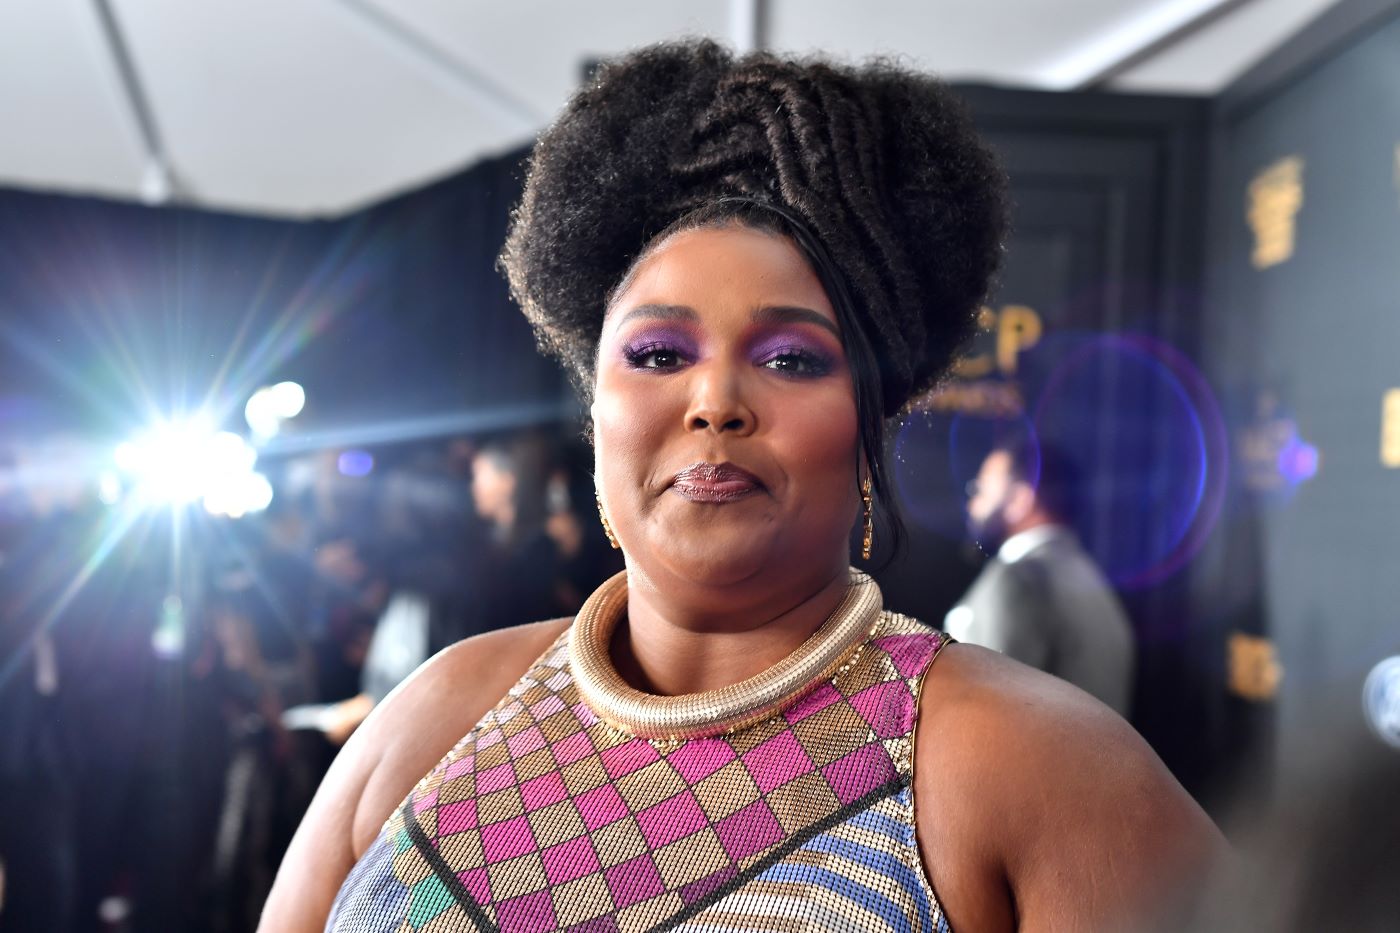 Lizzo is wearing a colorfully patterned top standing in front of a black background with gold writing and a bright light on the left side.